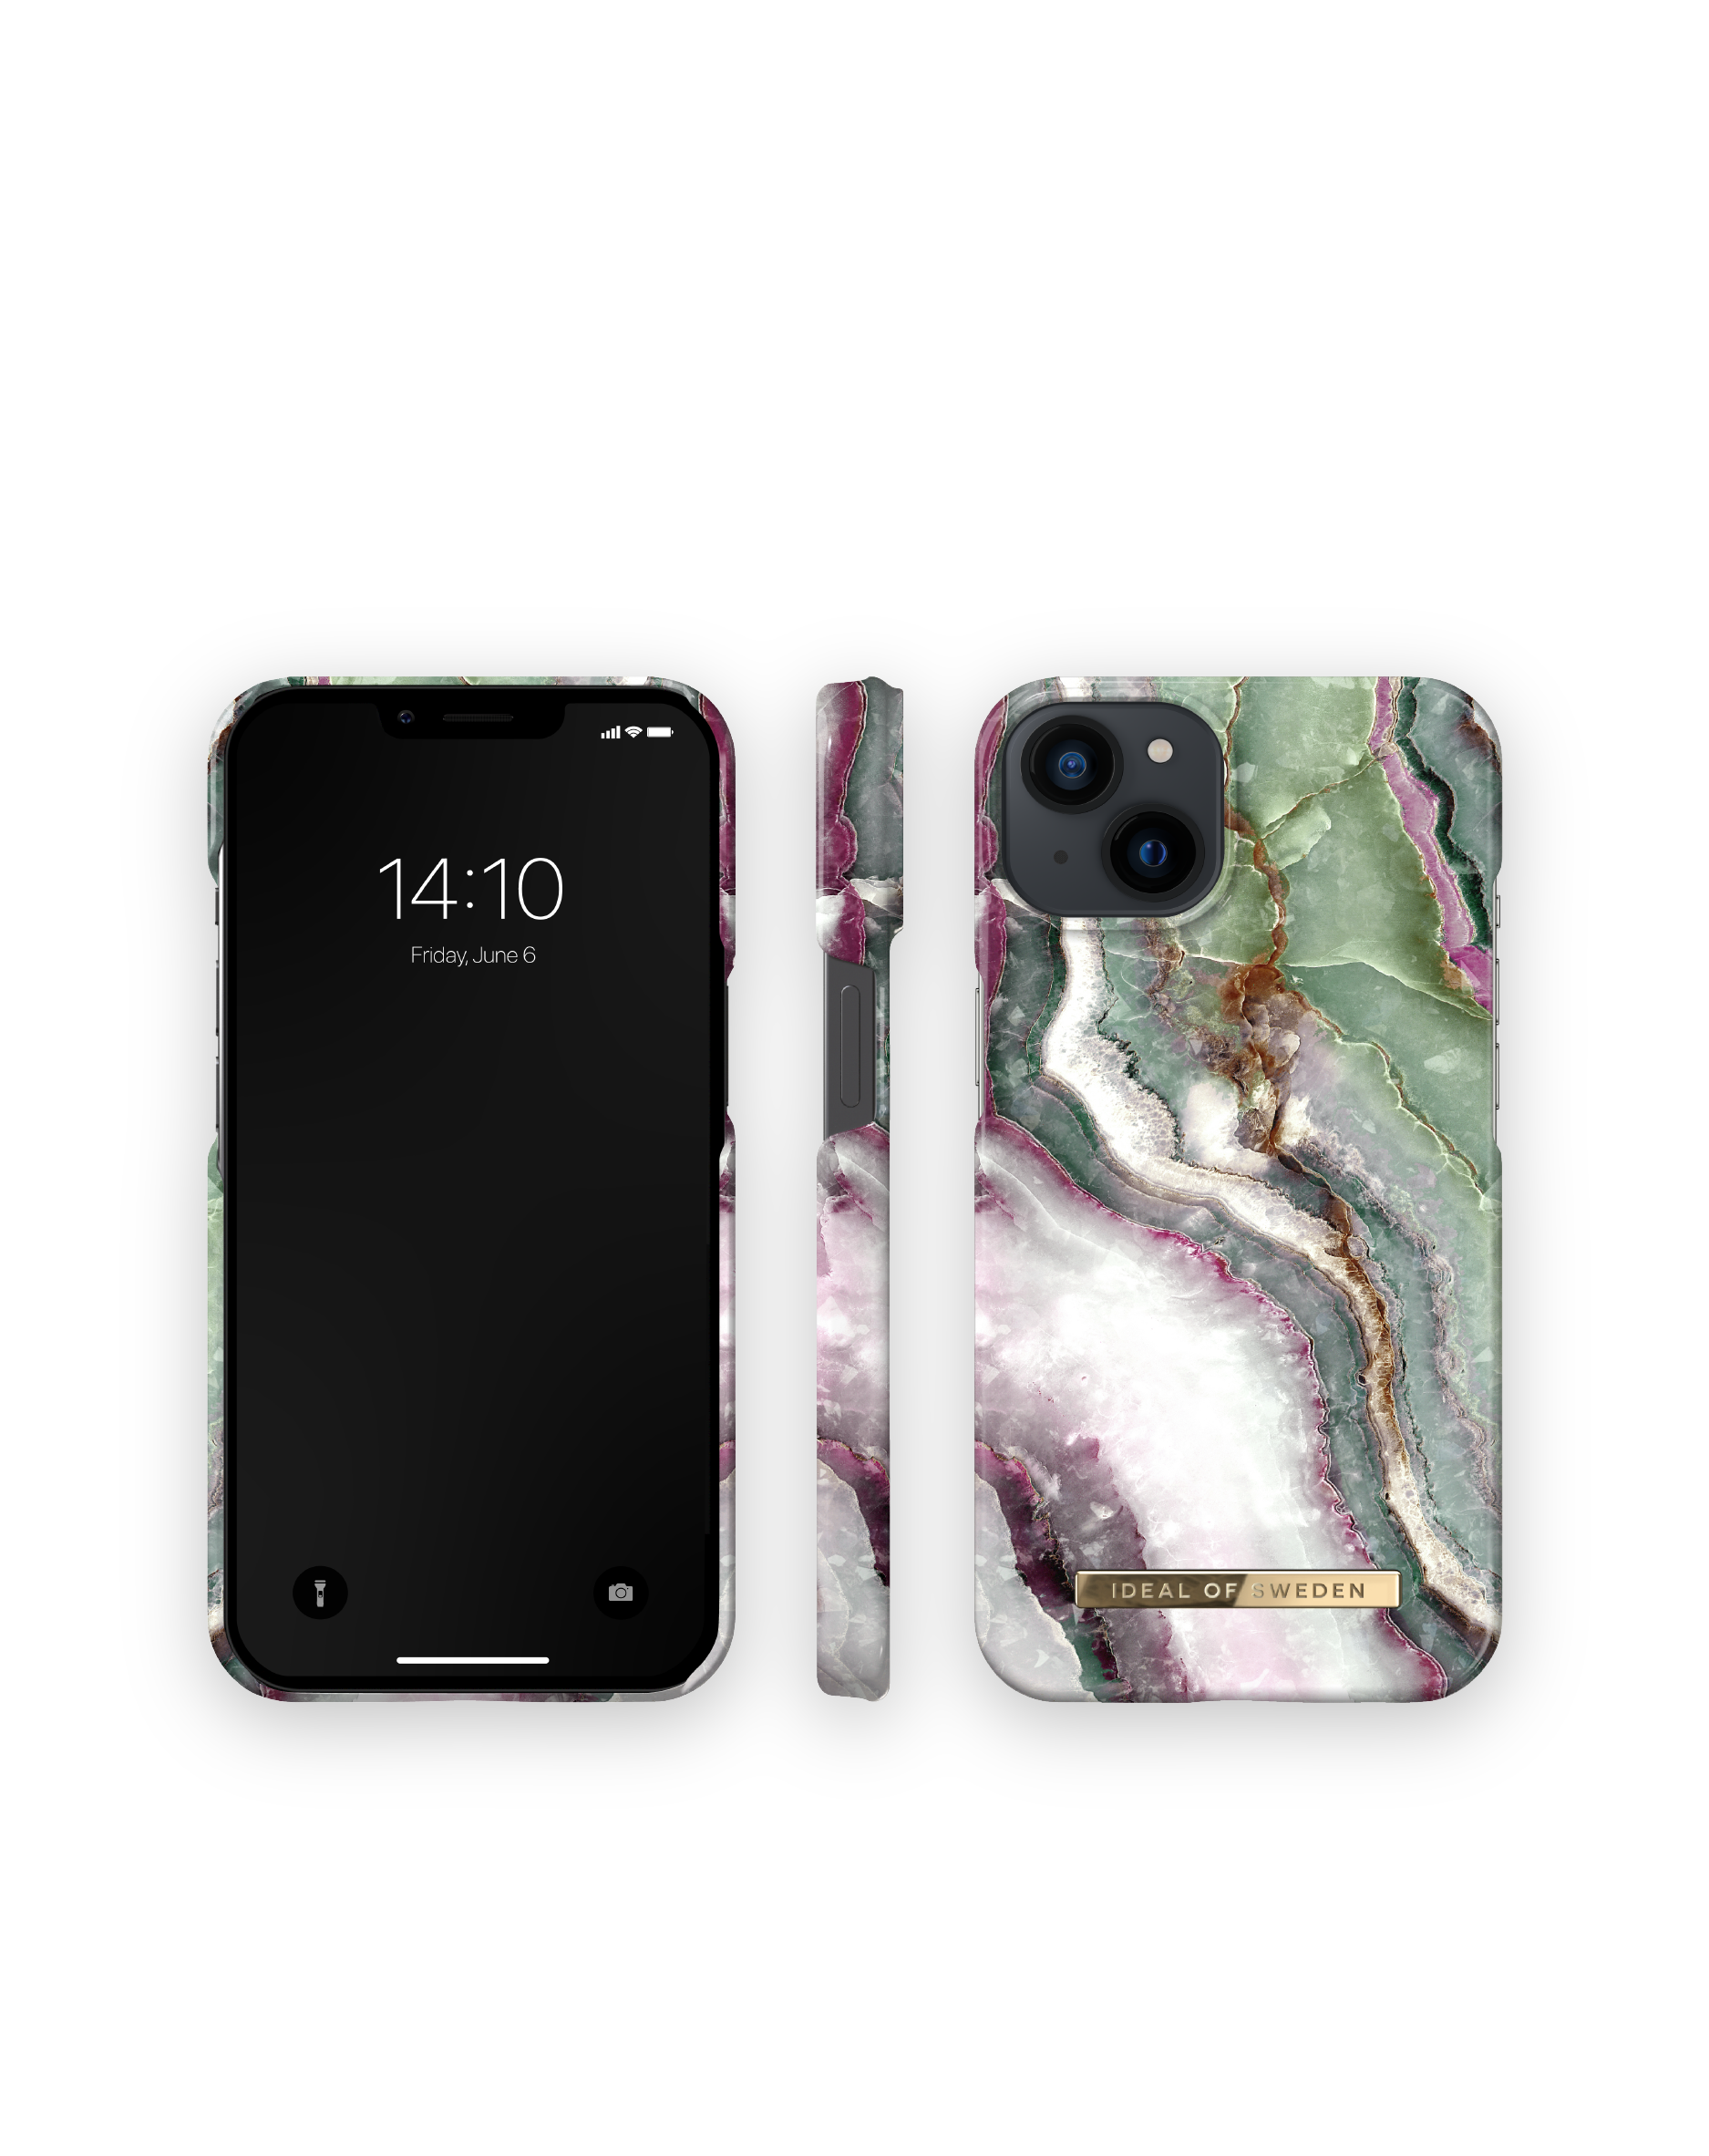 IDEAL OF Apple, iPhone IDFCAG22-I2261-448, Lights iPhone Backcover, 13, Northern SWEDEN 14